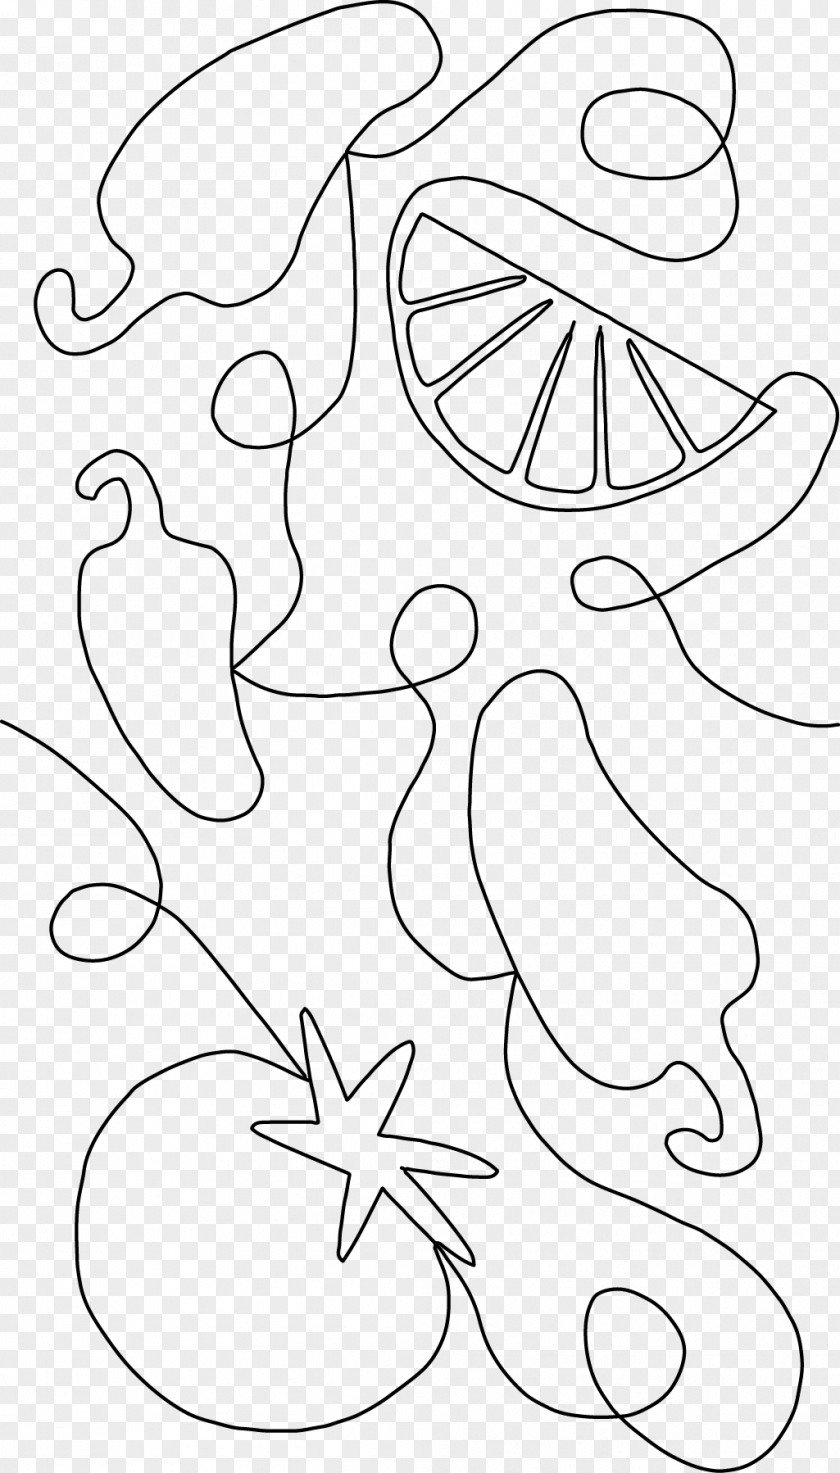 Over Edging Sewing Machine Visual Arts Line Art Flower PNG